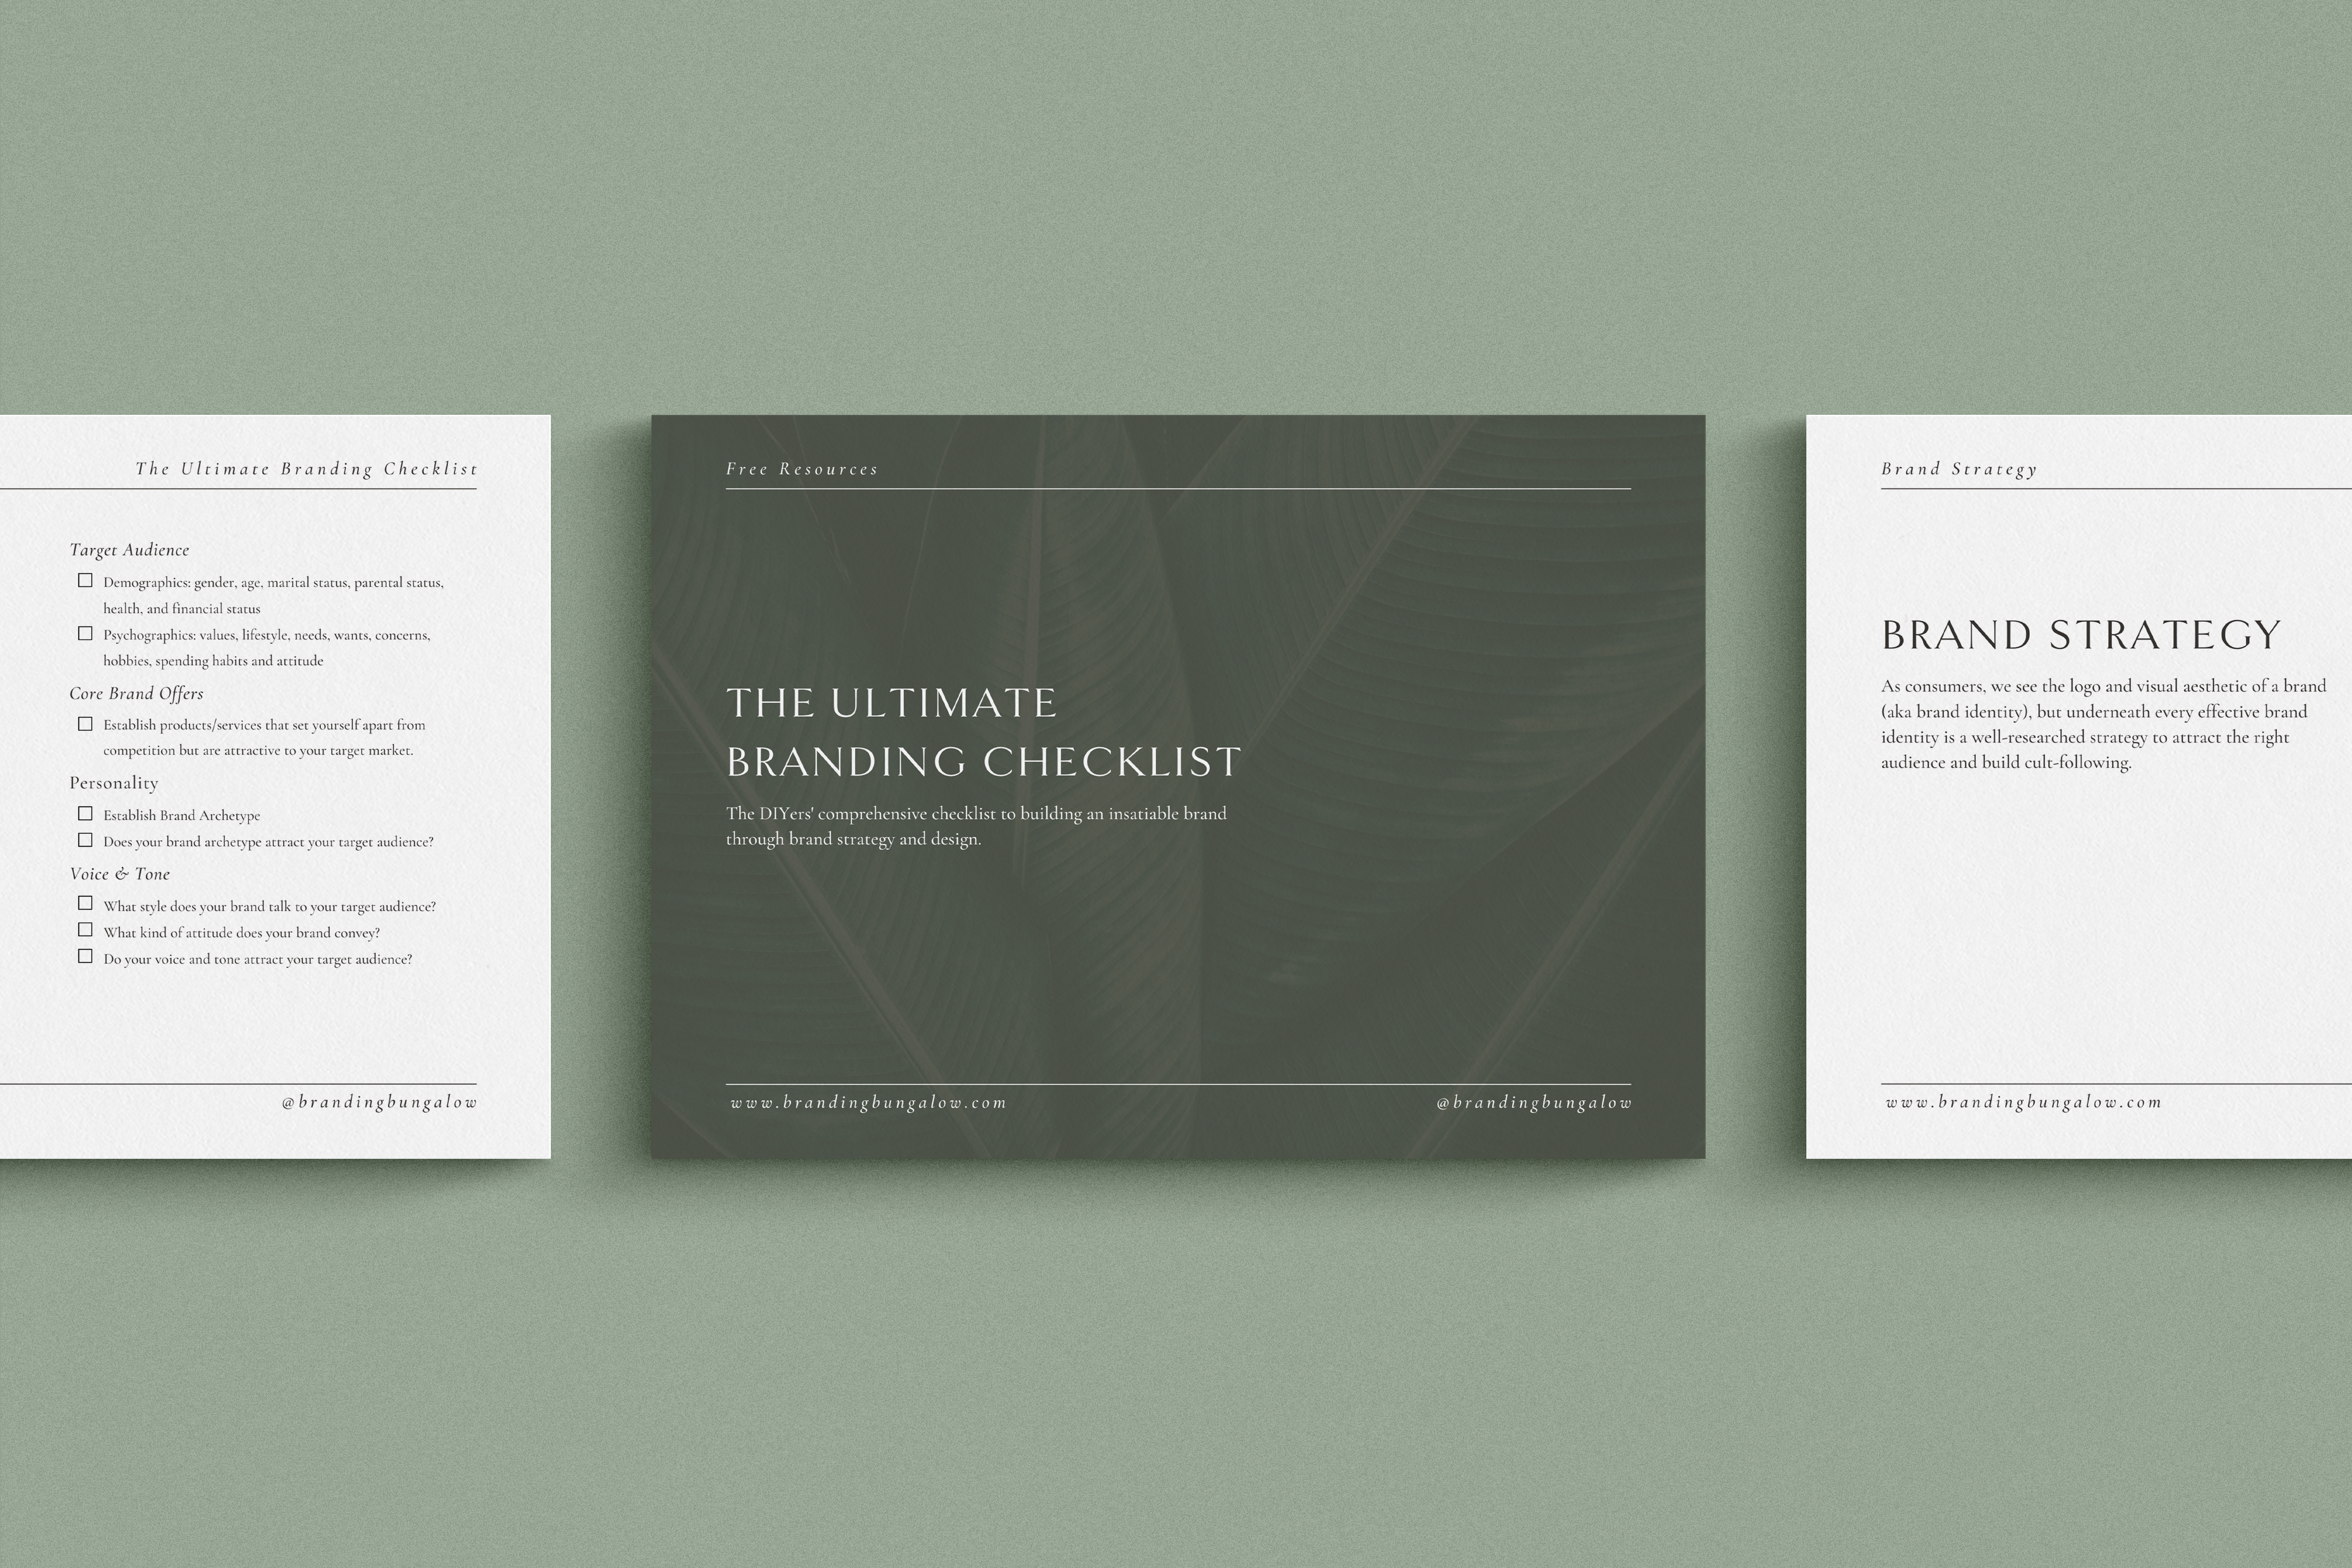 Front cover of Branding Bungalow's Branding Checklist that includes brand positioning tools and brand identity